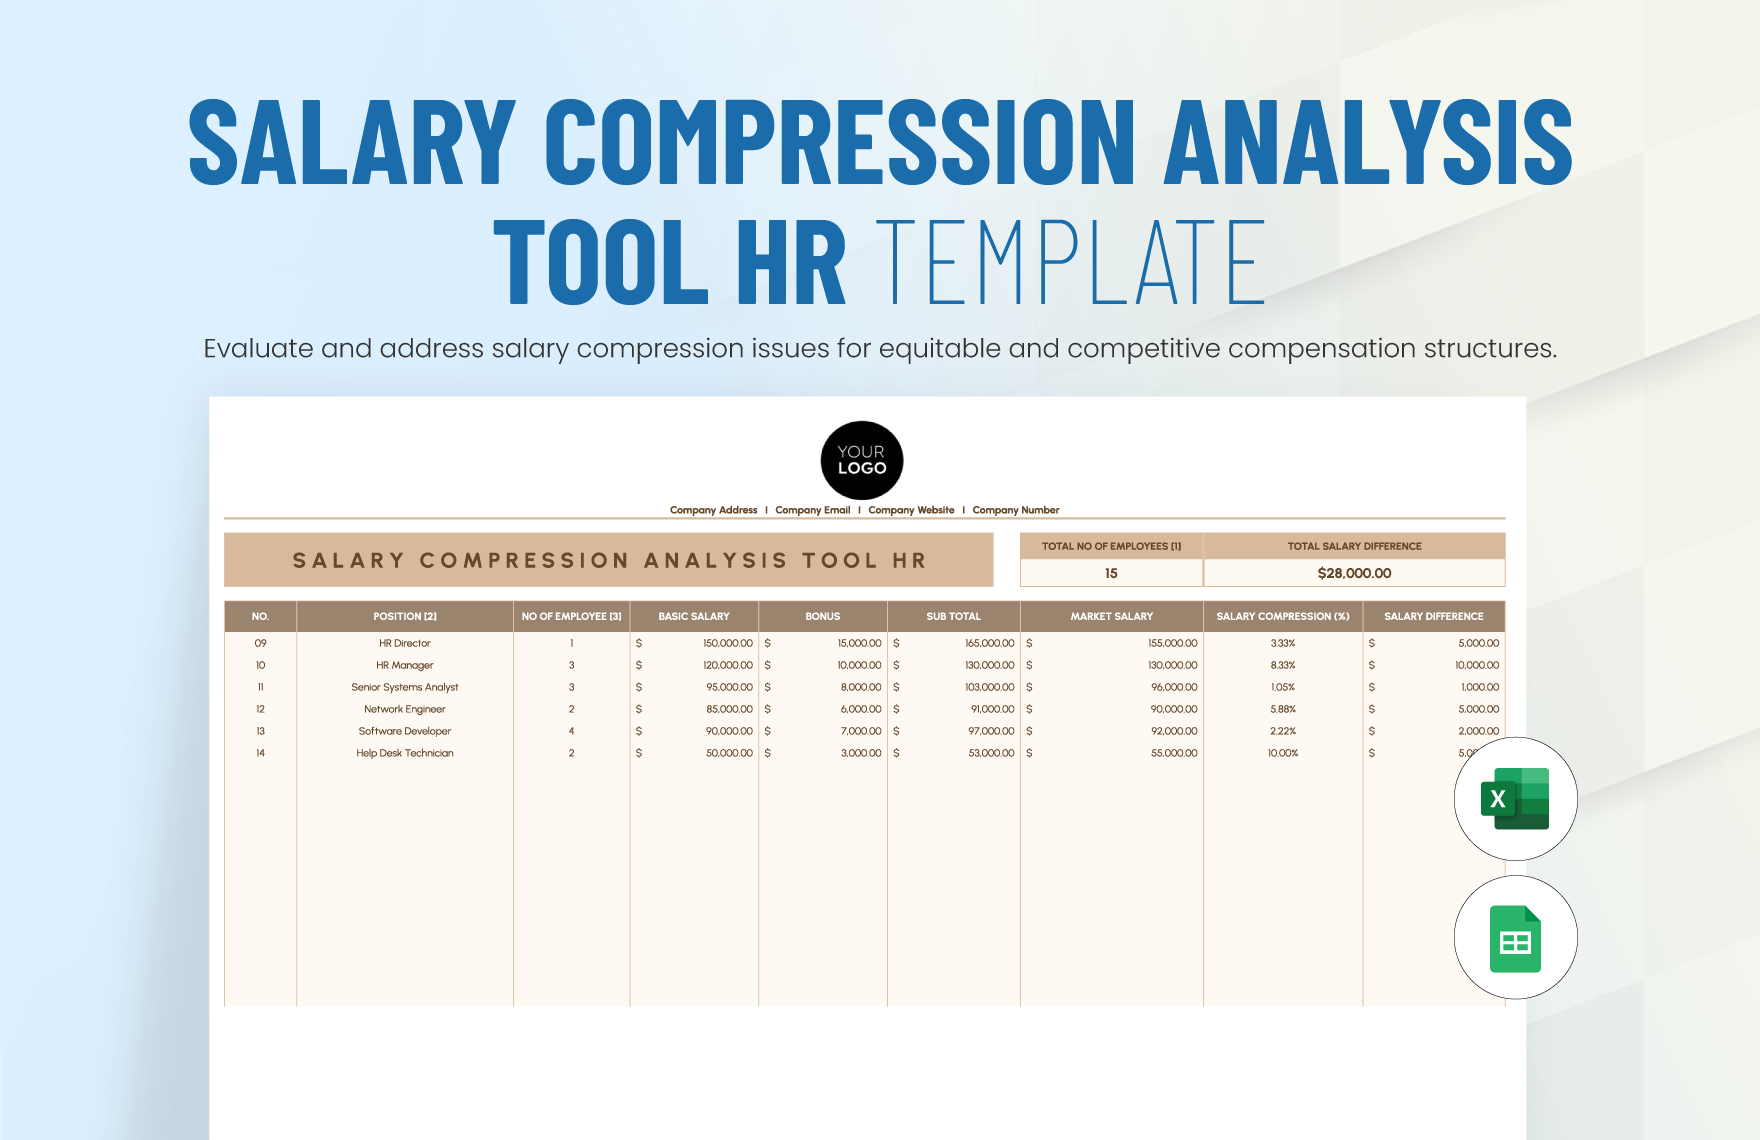 Salary Compression Analysis Tool HR Template